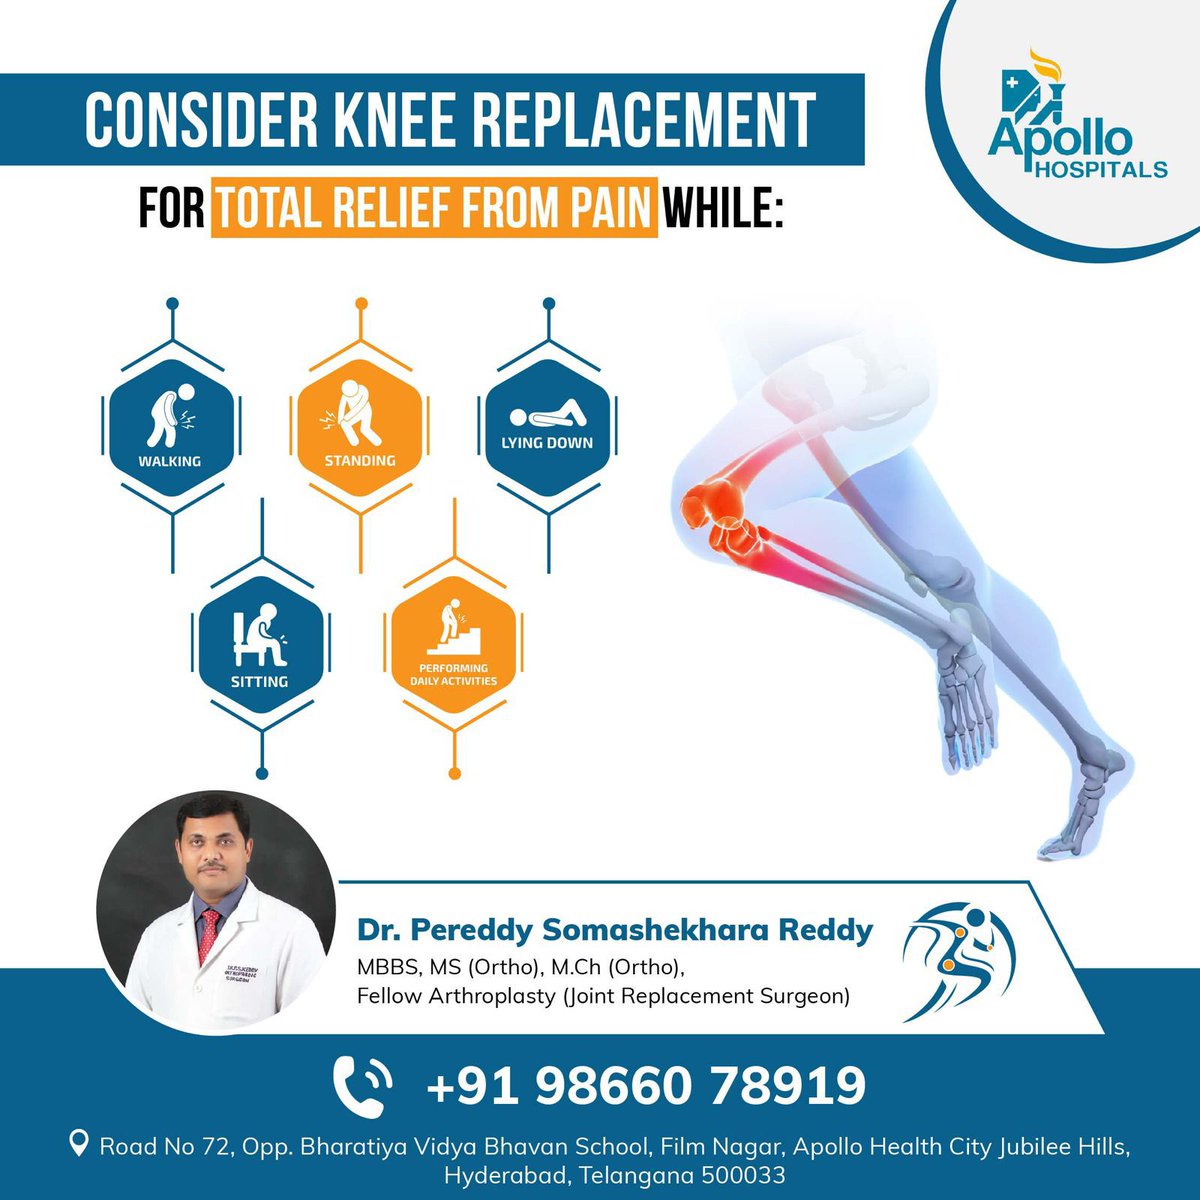 Consider Knee Replacement for Total Relief From Pain While
👉 Lying Down
👉 Walking
👉 Standing
👉 Sitting
👉 Performing Daily Activities

For Appointments:
Call us: +91 98660 78919
#DrPereddySomashekaraReddy #DrSomashekaraReddy #SomashekaraReddy #ApolloHospitals #KneeReplacement